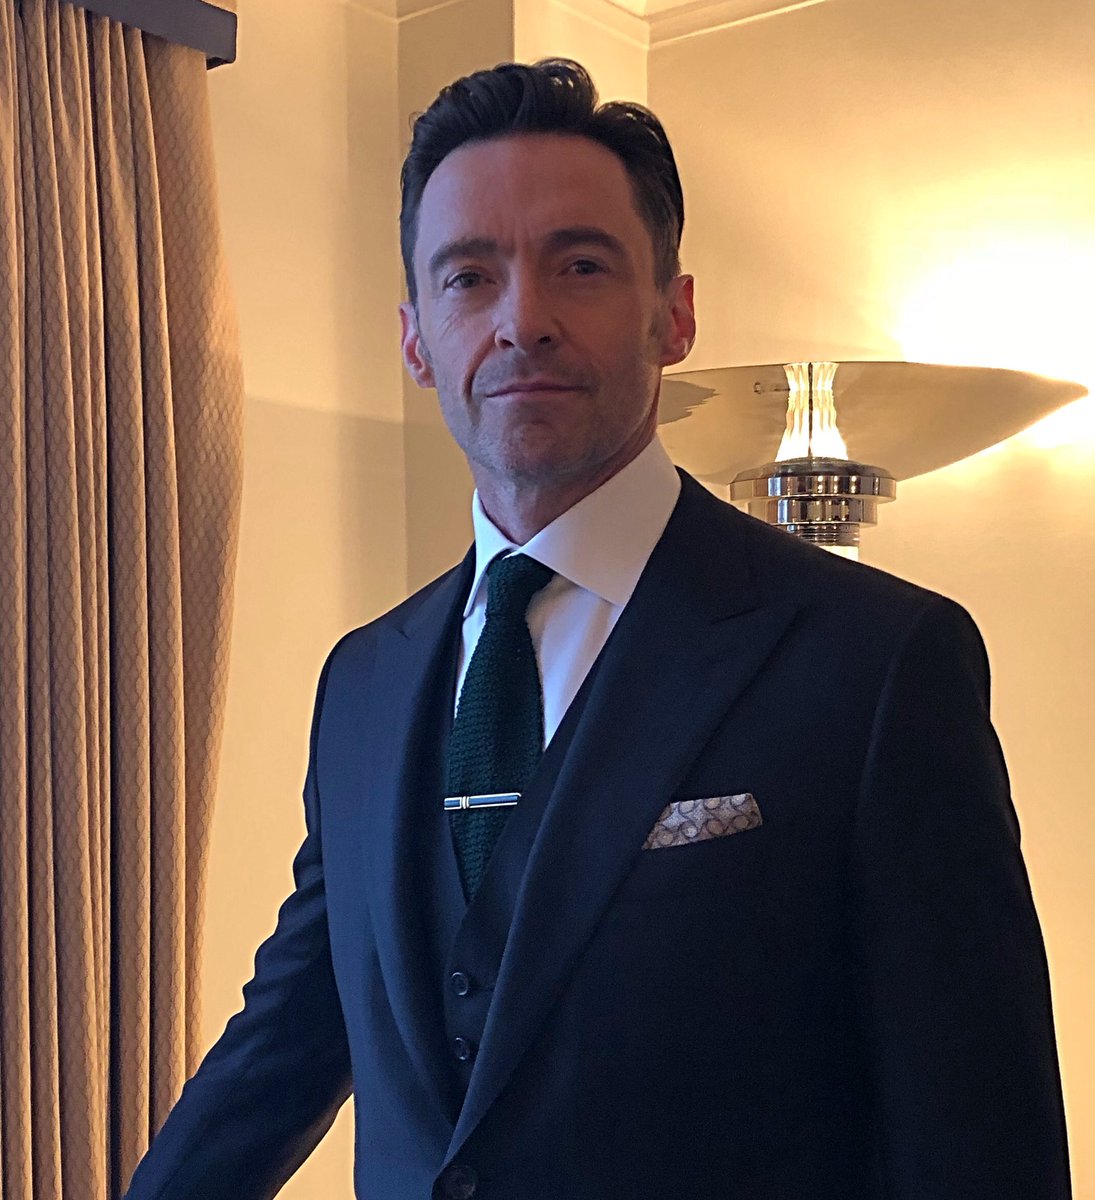 Buffed and polished ready for the #empireawards #Logan #London https://t.co/QomSgsuKyT